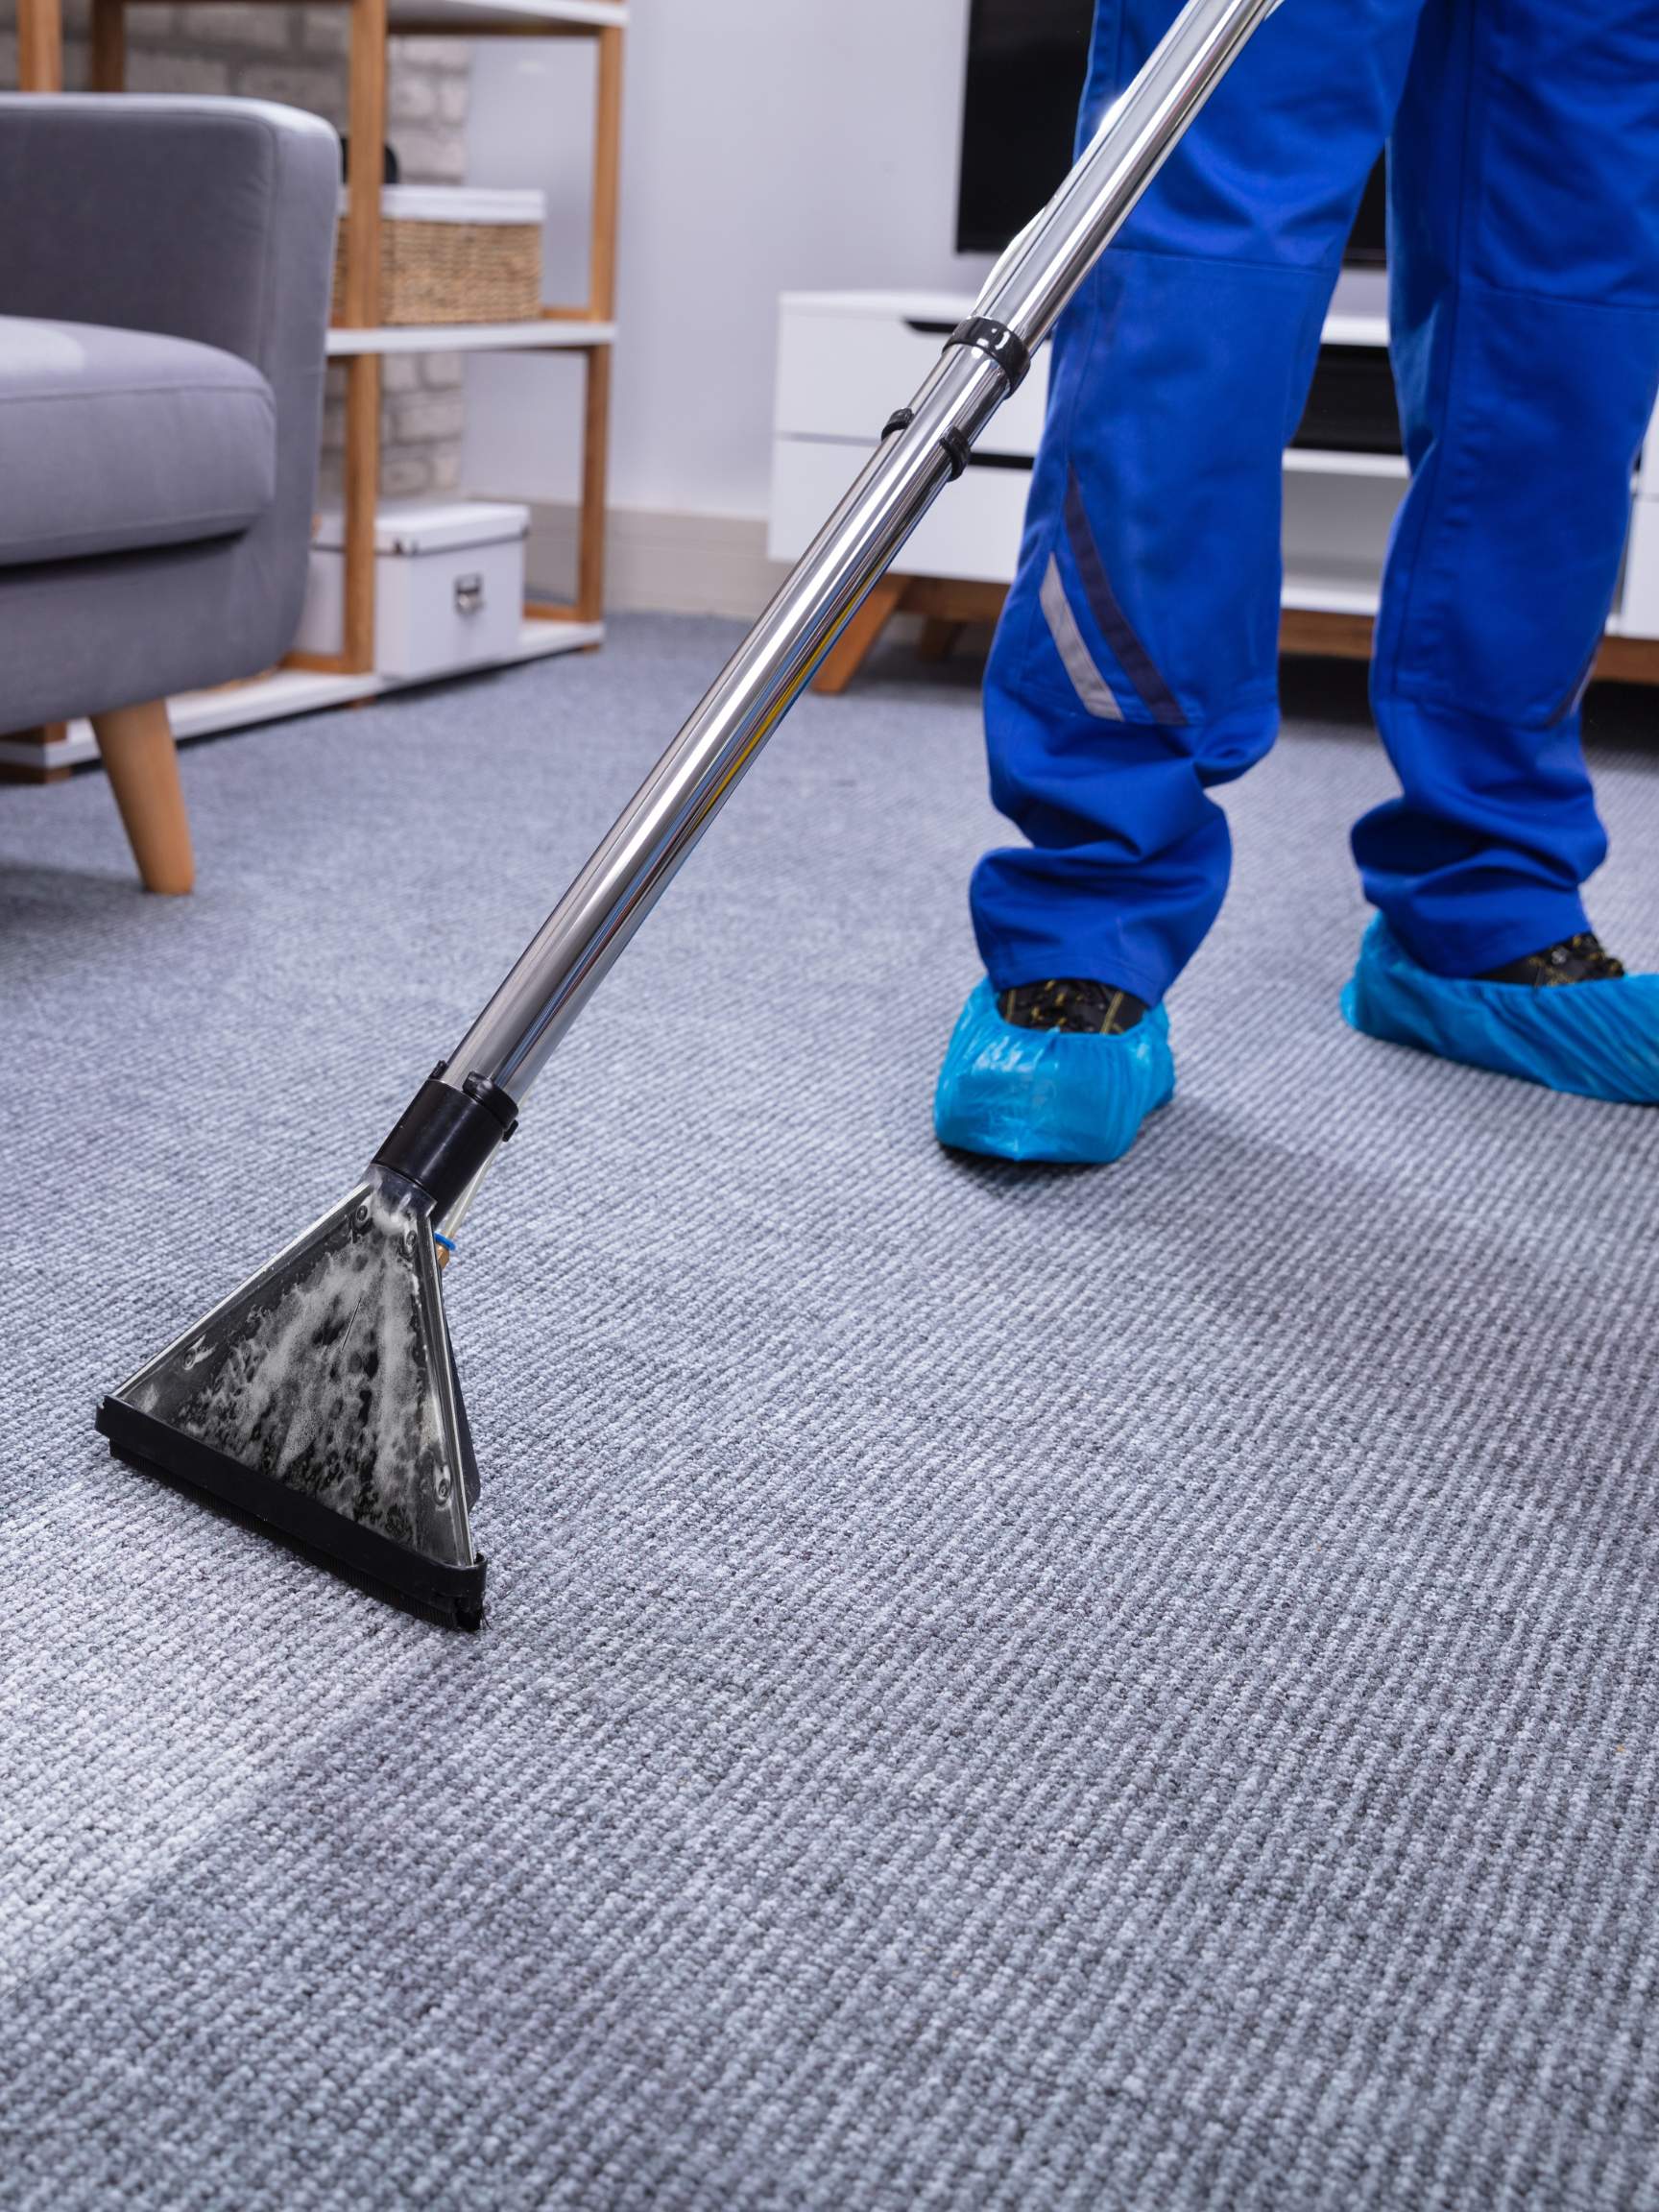 a person using an electronic cleaning machine to clean a light grey carpet. the person is wearing protective waterproof blue footies and clotihing